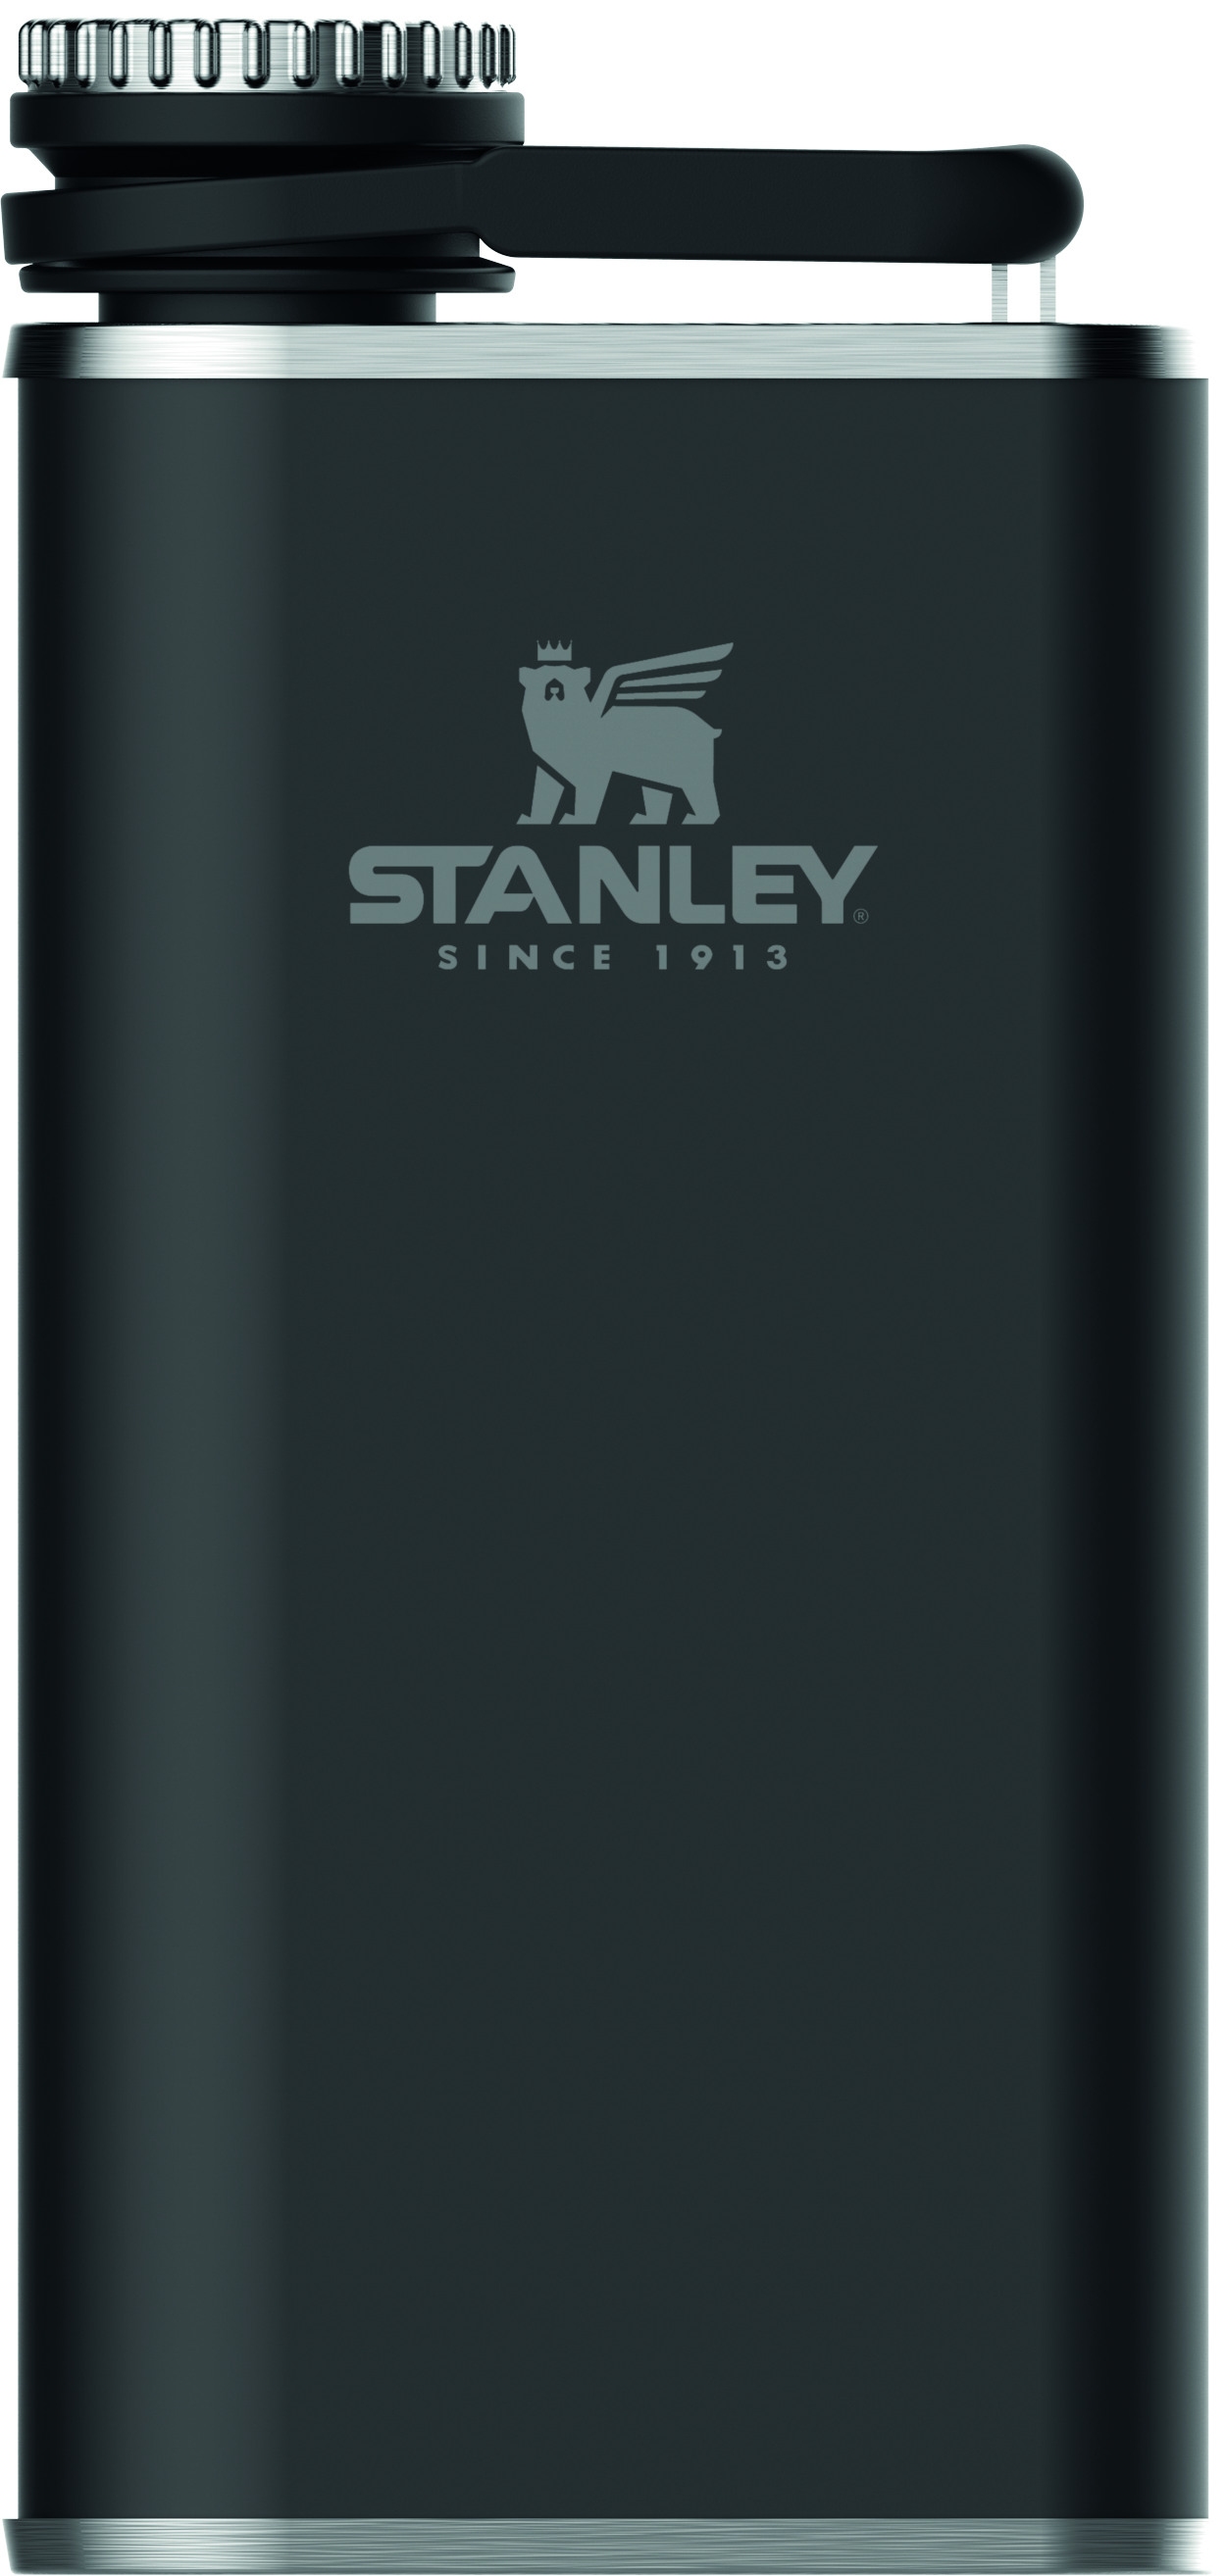 https://promotionway.com/data/shopproducts/1242/stanley-classic-easy-fill-wide-mouth-flask-0-23-l-2.jpg